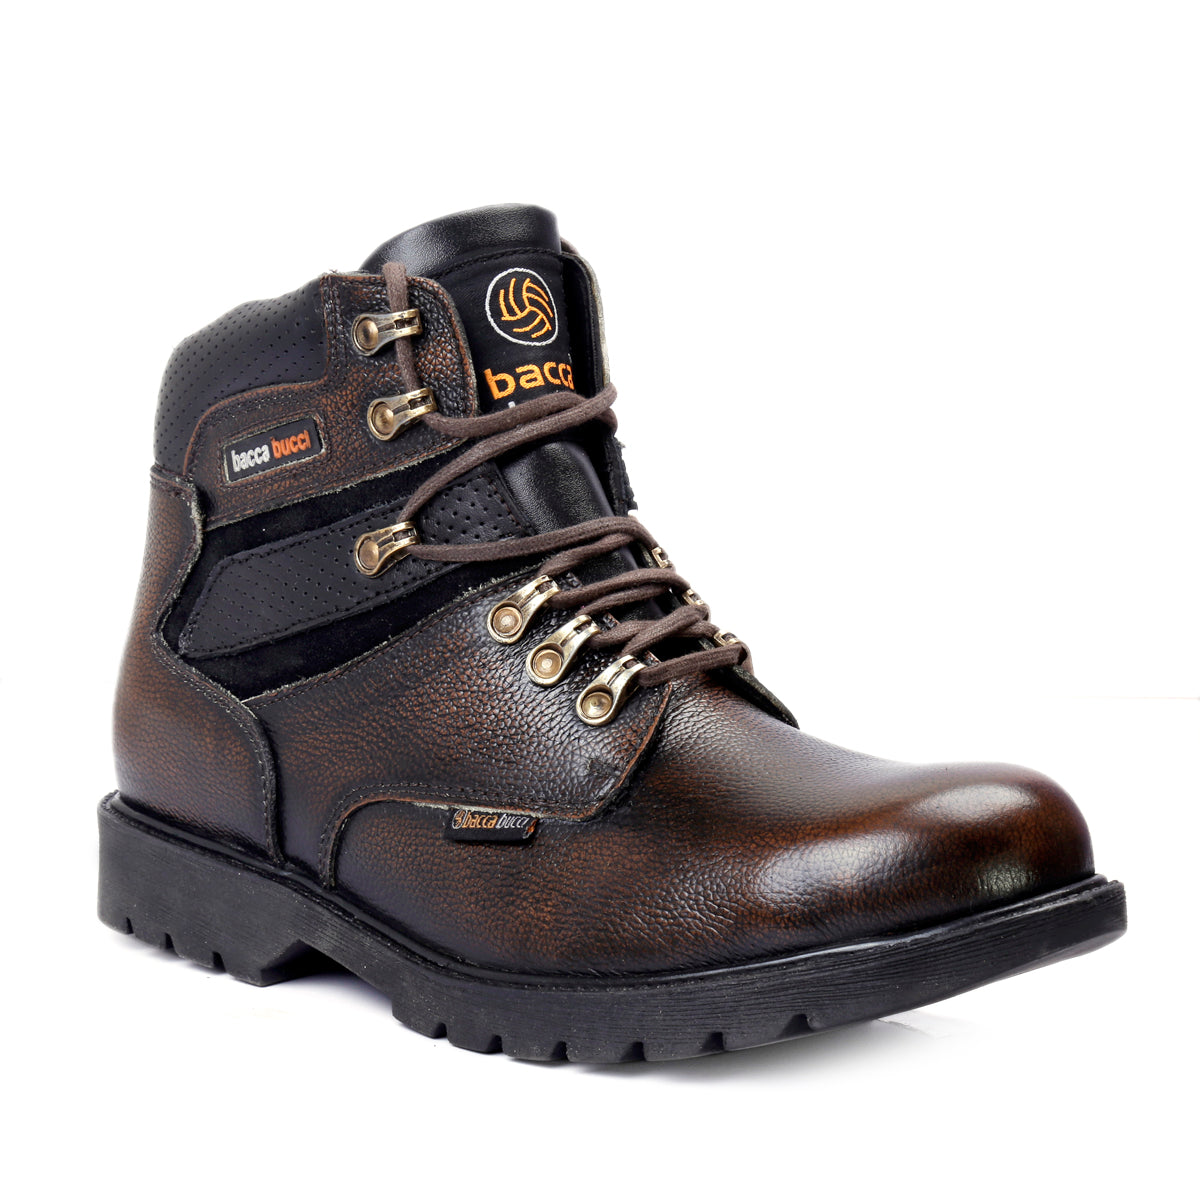 leather boots, leather boots for men, brown leather boots, brown lace up boots, grain leather outdoor shoes, steel toe cap boots